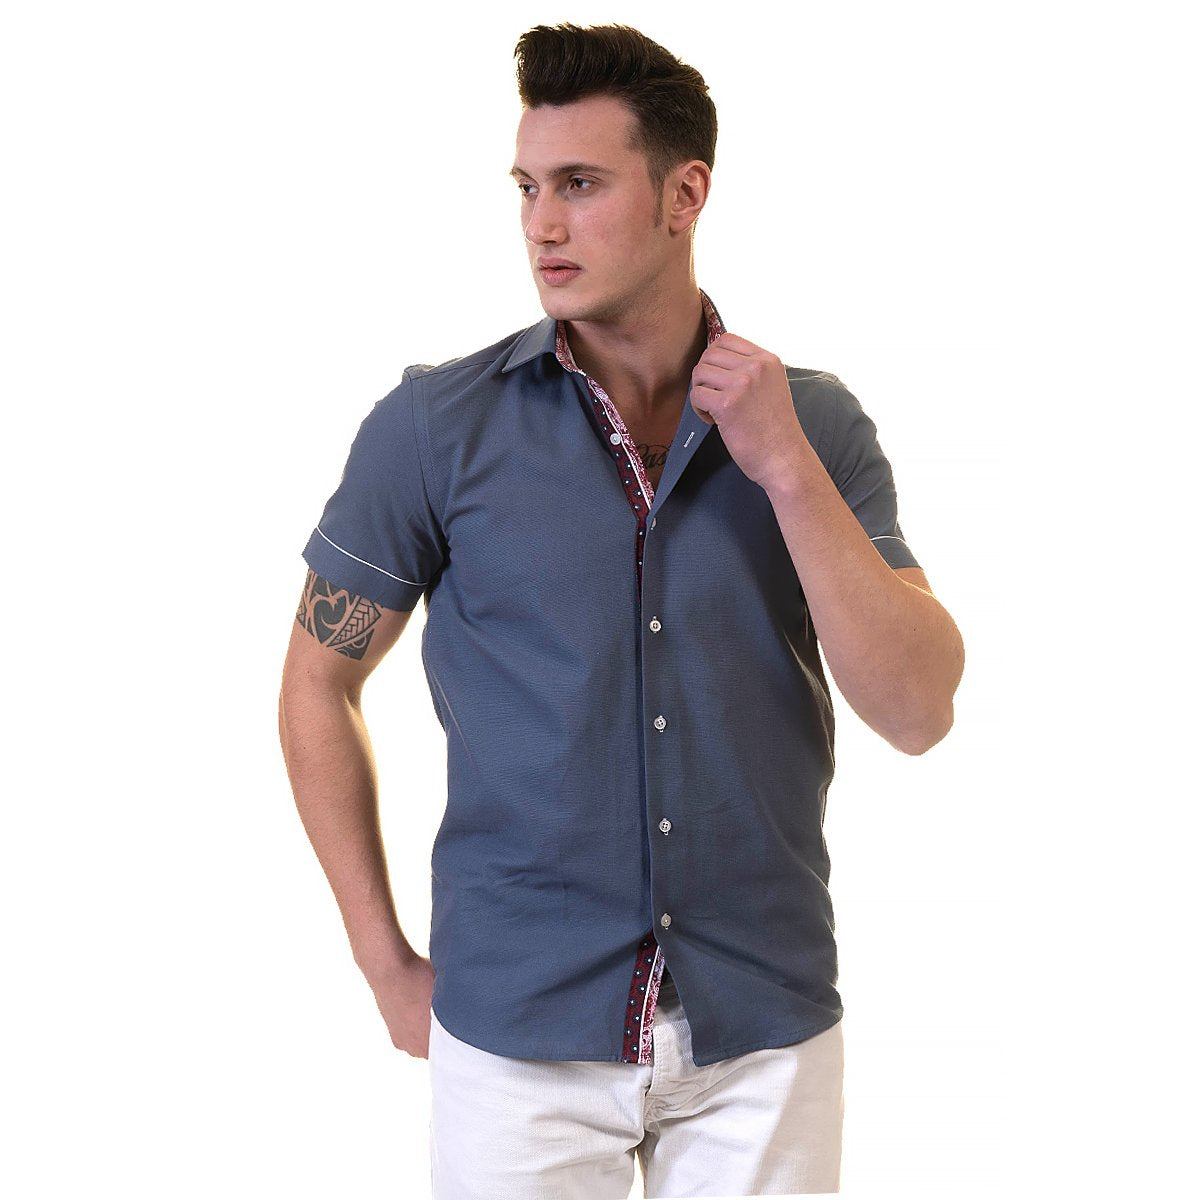 Picture of a Premium Men's Short Sleeve Button Up Shirt in Navy Blue front view